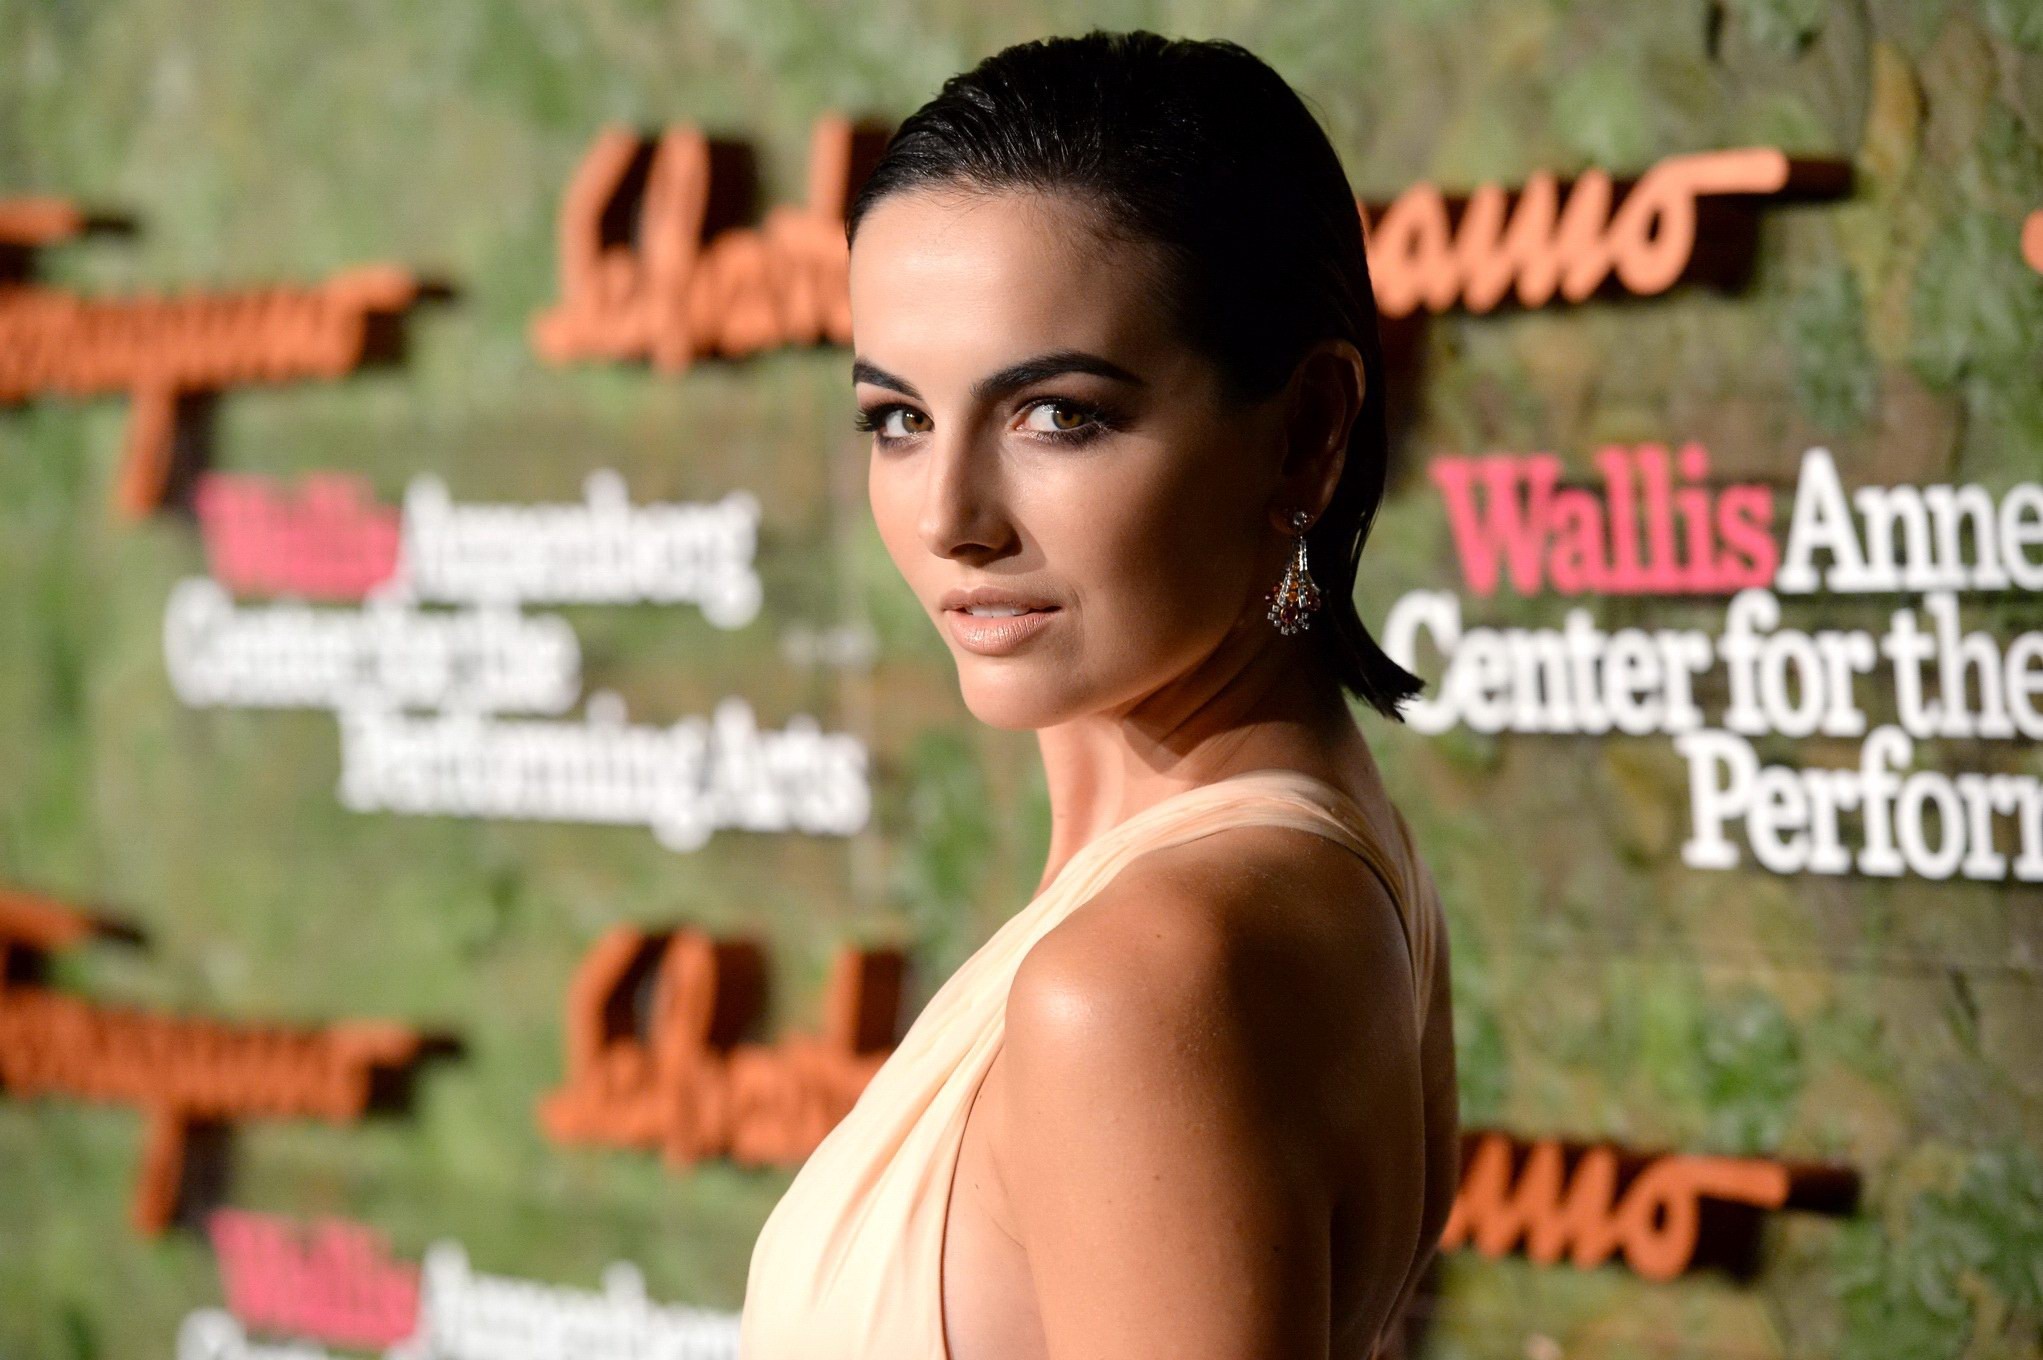 Camilla Belle showing huge cleavage at Wallis Annenberg Performing Arts Gala in  #75215519